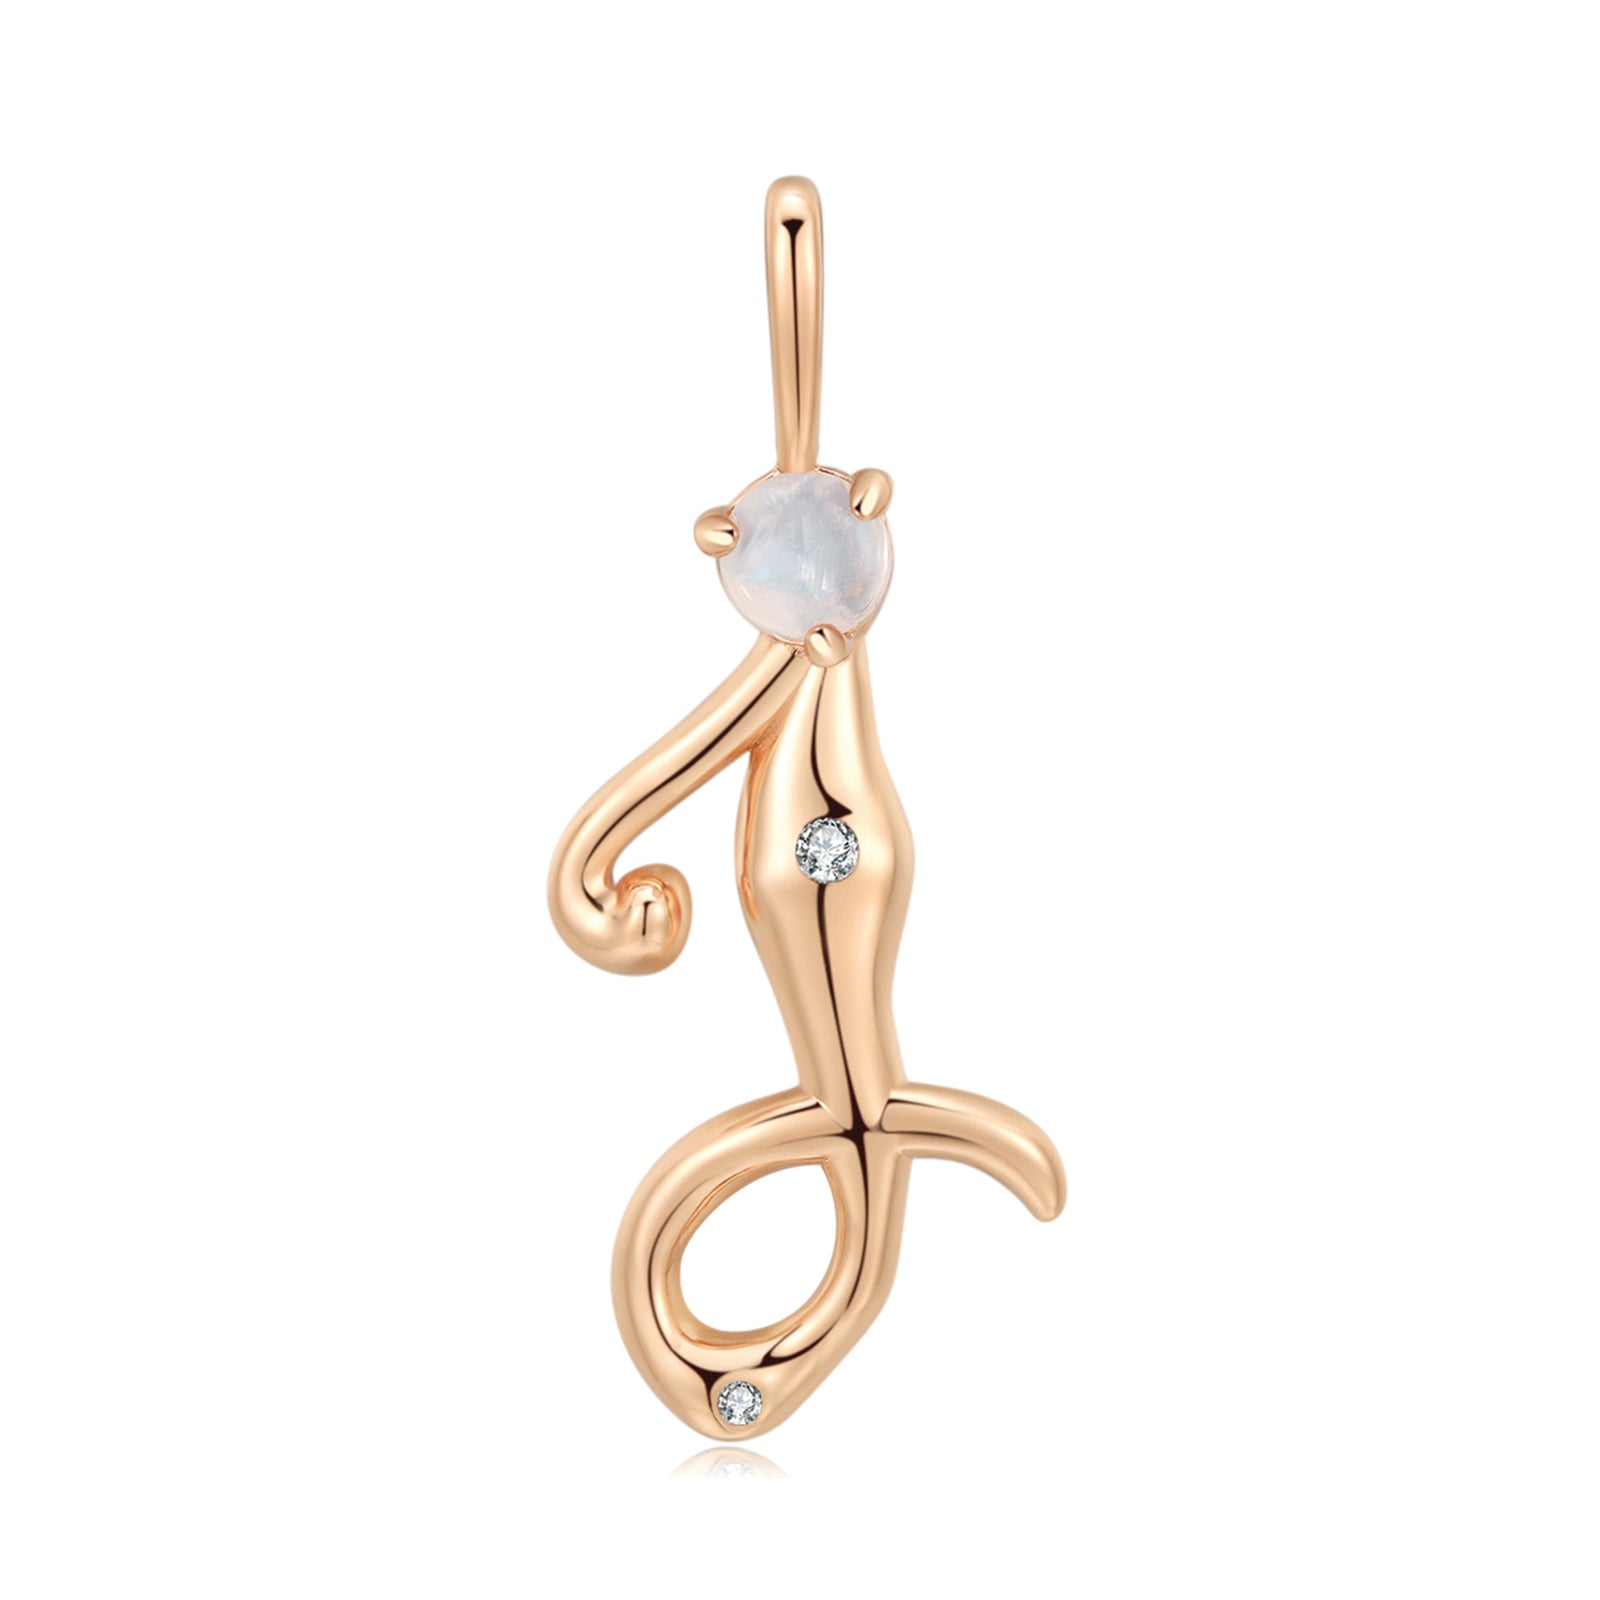 Moonstone Gold Vermeil Letter Pendant - A to Z | LOVE BY THE MOON